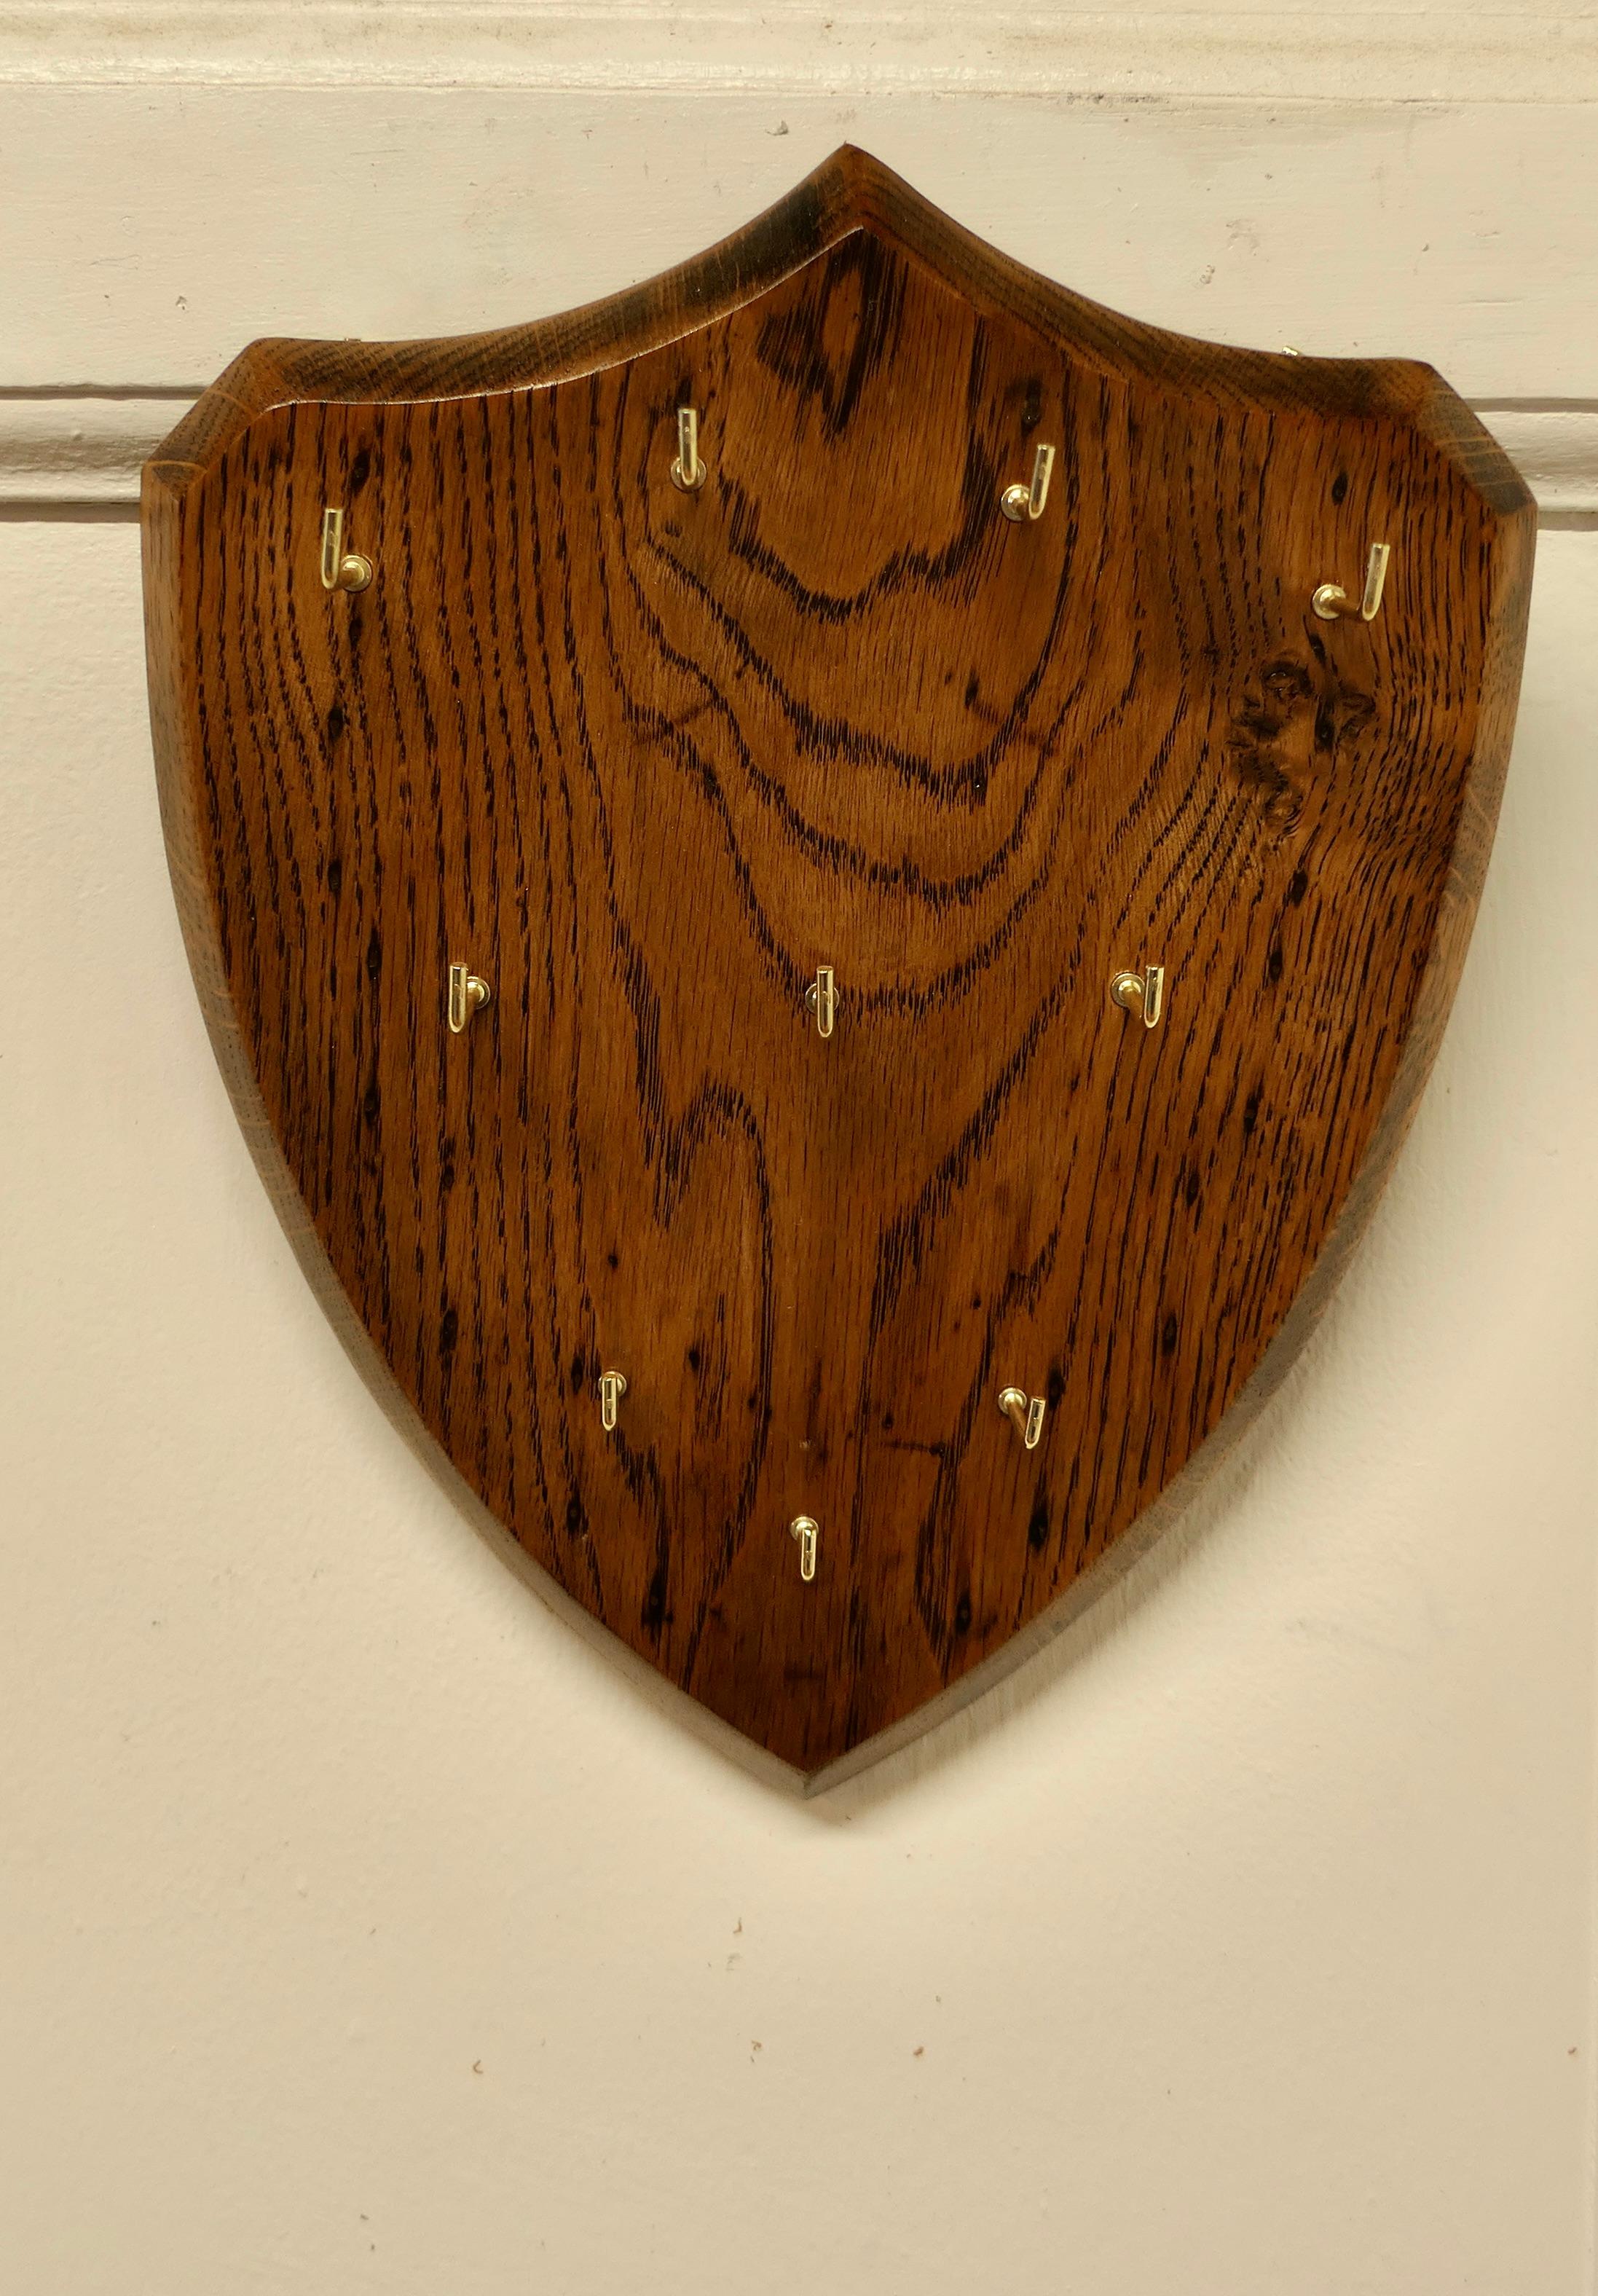 Oak Shield Hotel Reception Key Board 

This is a Solid Oak Key board in the shape of a shield, it has 10 key hooks on the front, the rack can be wall hung
The rack is in good condition, it is 11” high 9” wide and 2” deep
TCC77.